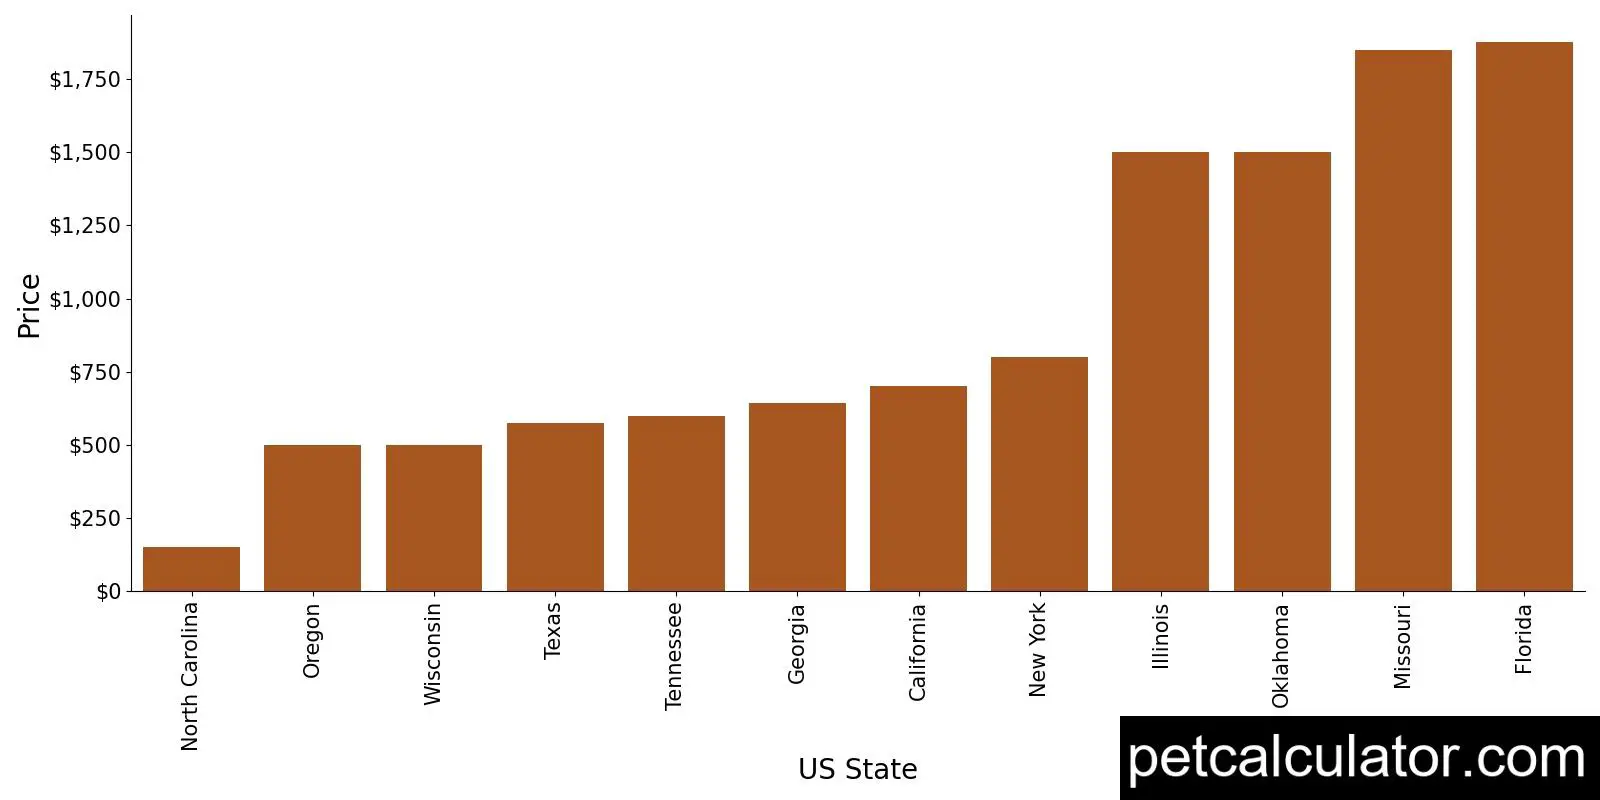 Price of Bearded Collie by US State 